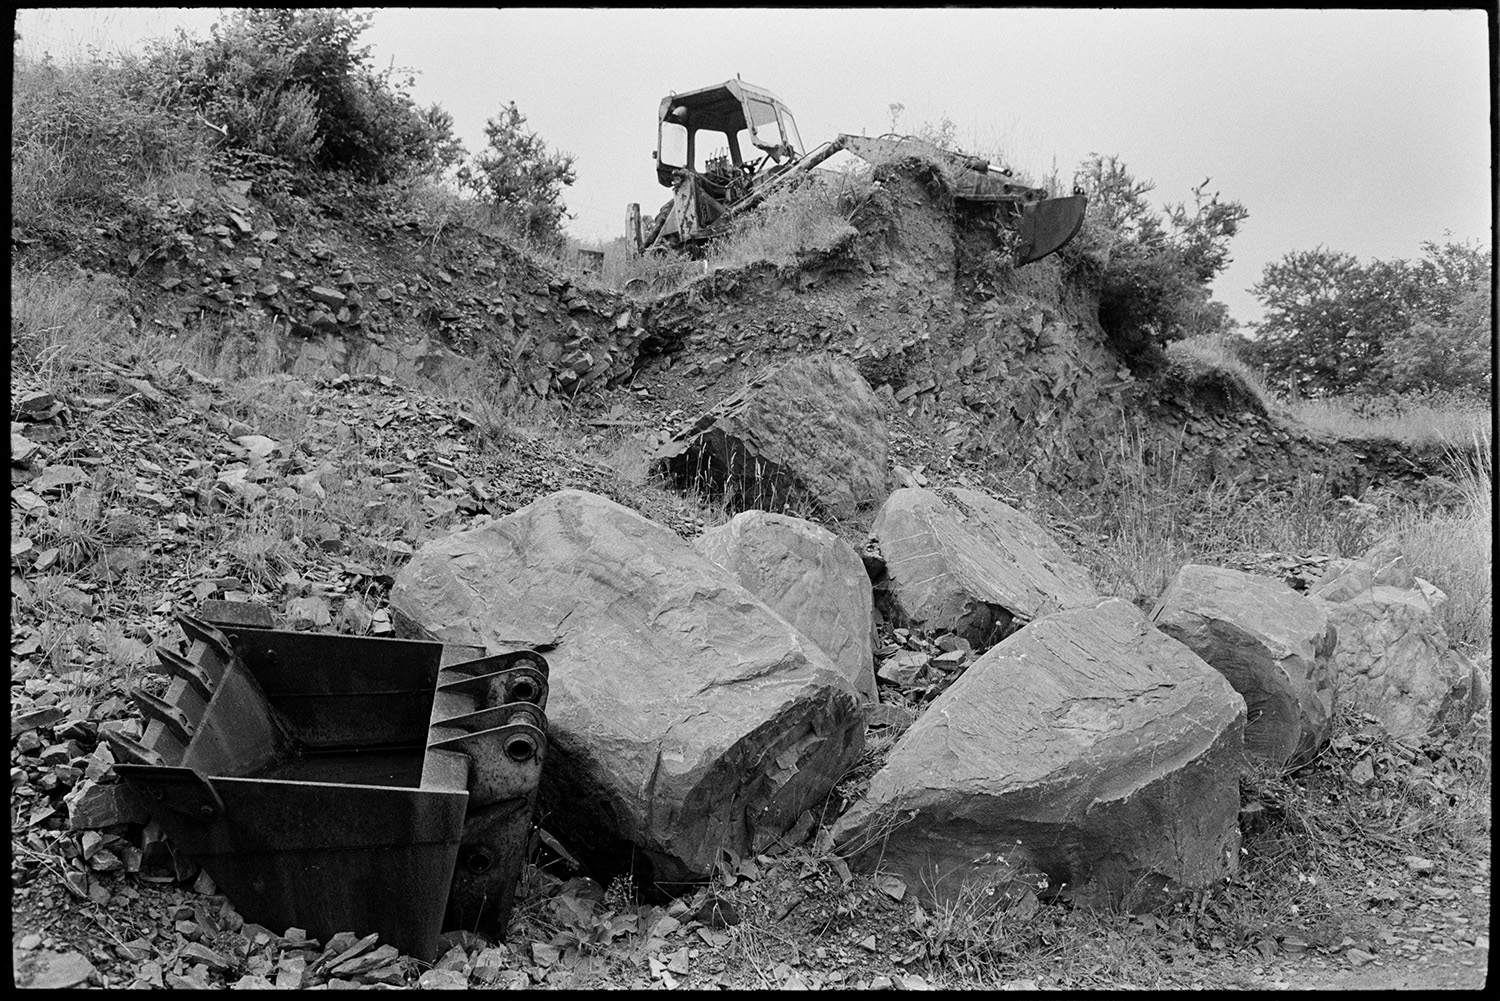 Abandoned machinery in quarry tractors, shovels. 
[A digger, digger bucket and boulders at Newbridge Quarry, Dolton.]